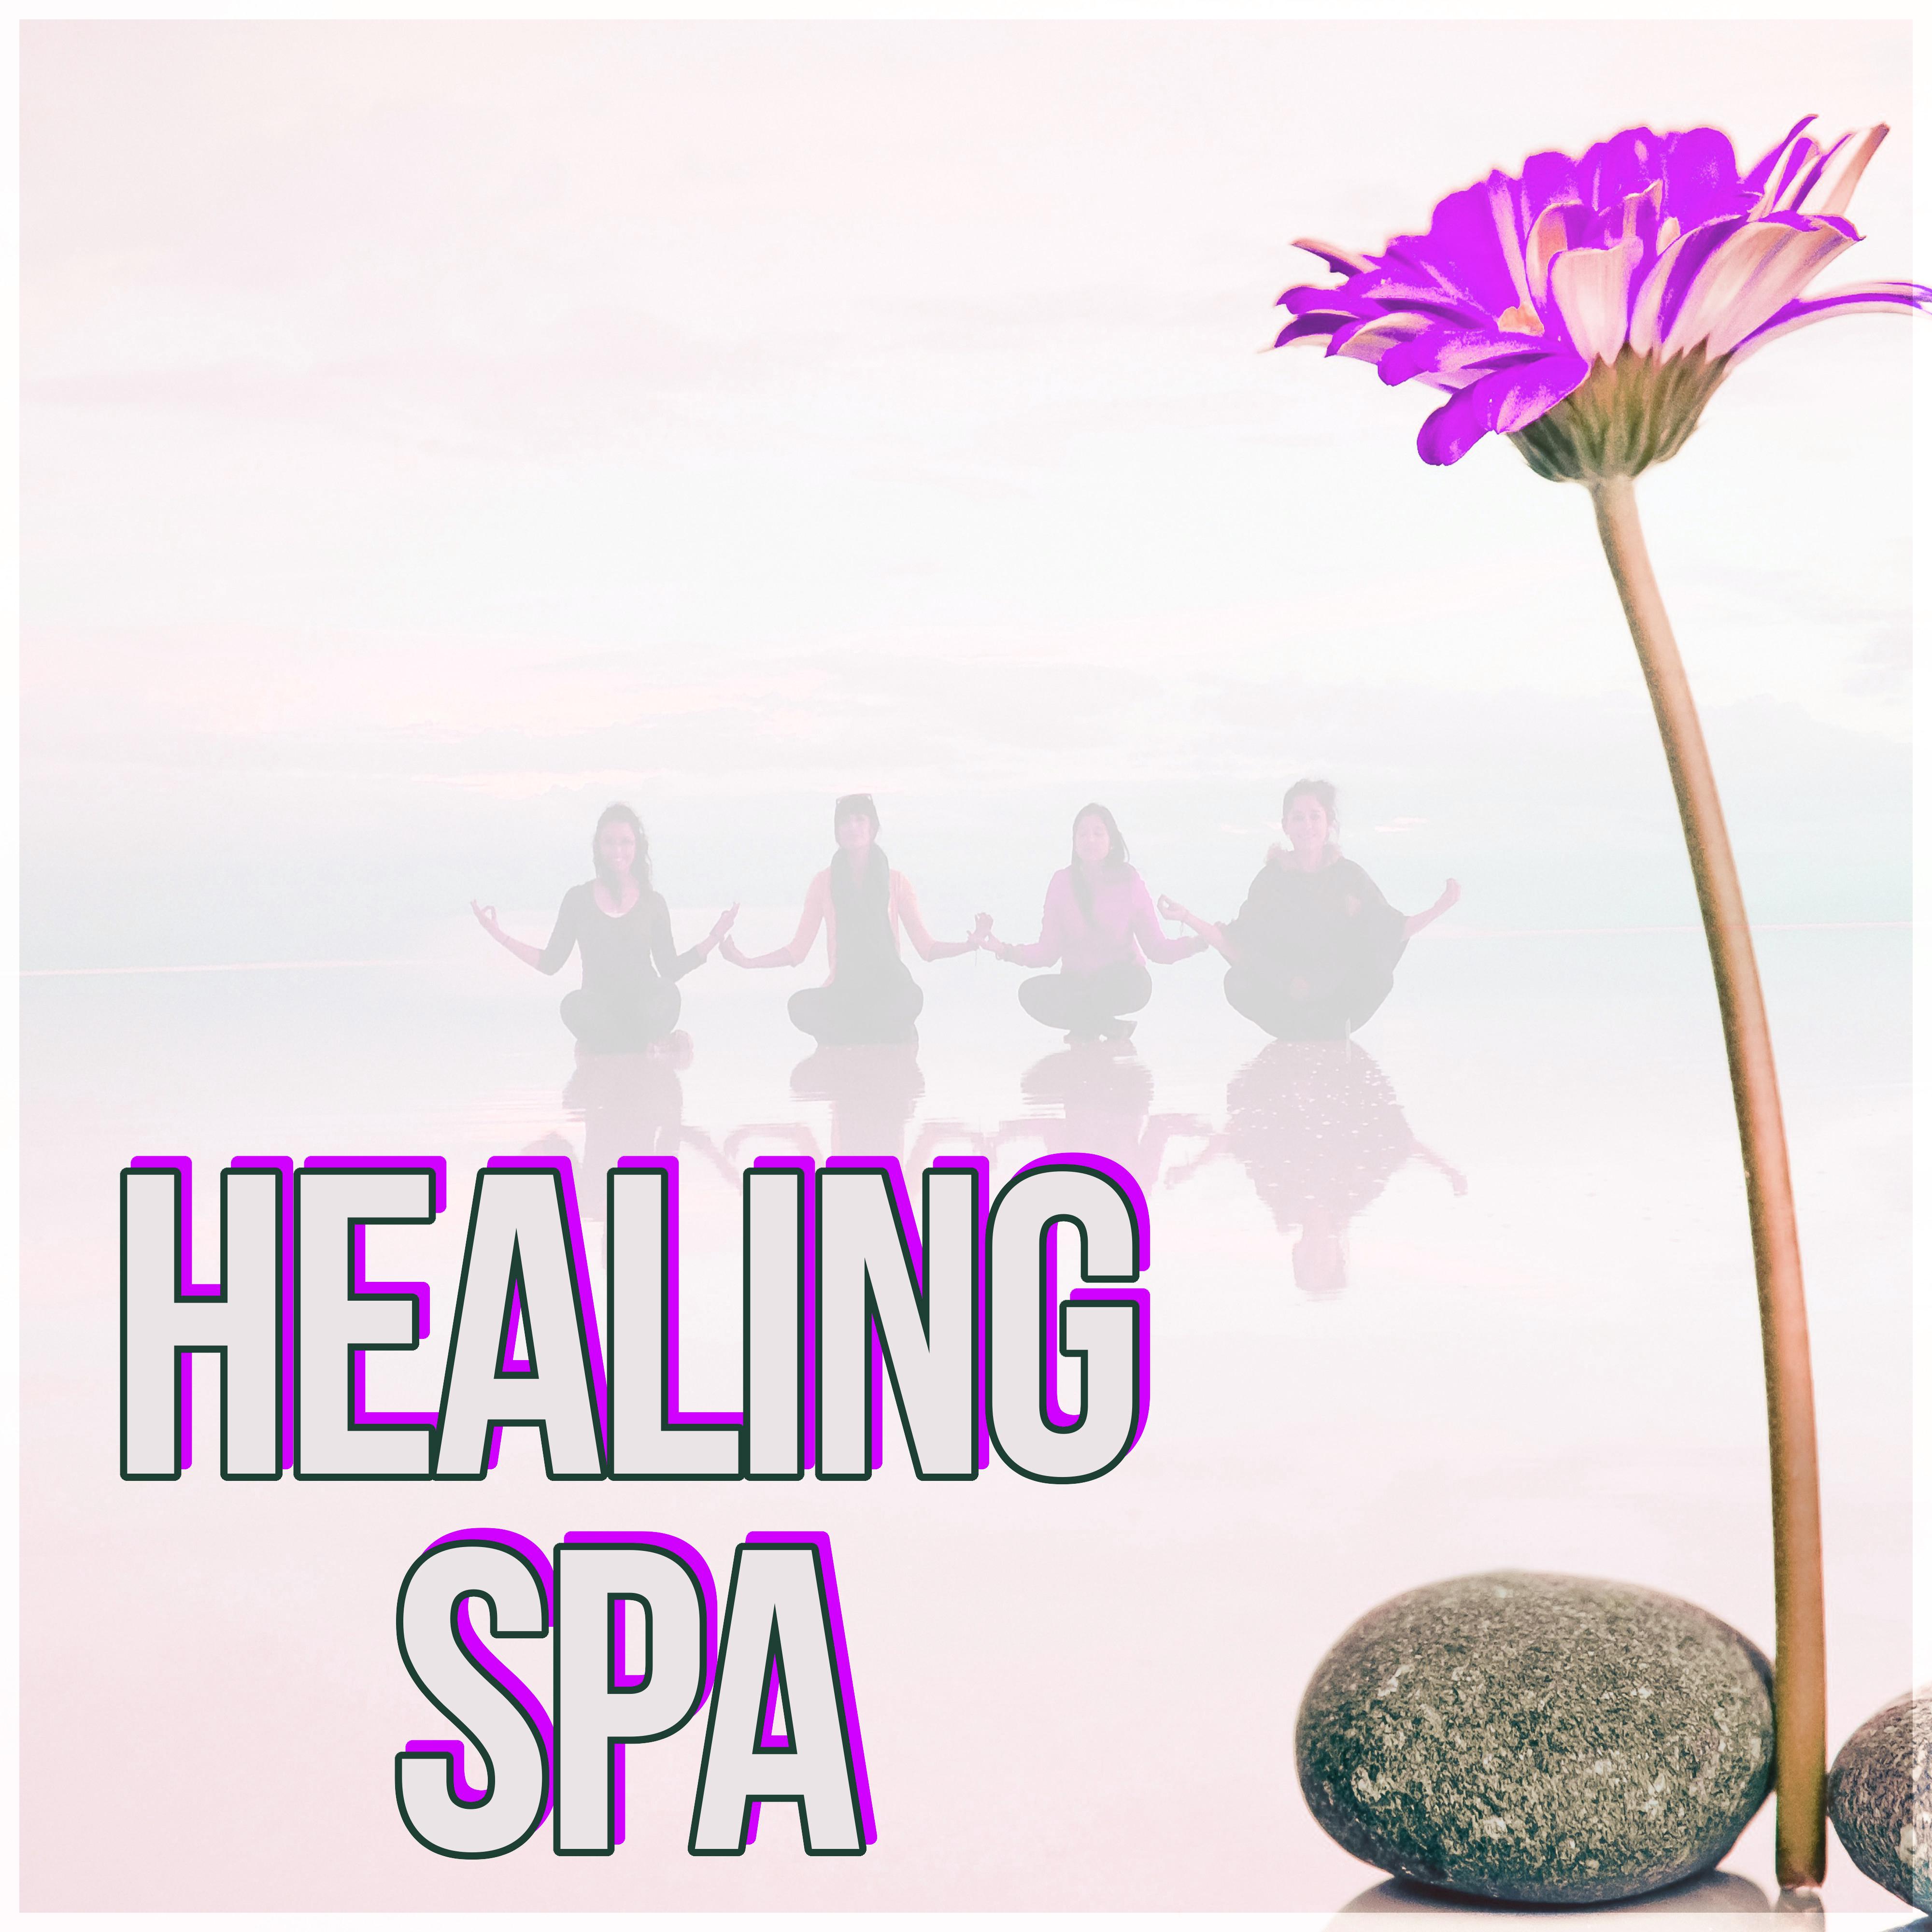 Healing Spa - Massage Music, New Age for Healing Through Sound, Gentle Touch, Pacific Ocean Waves, Water and Rain Sounds, Serenity Music